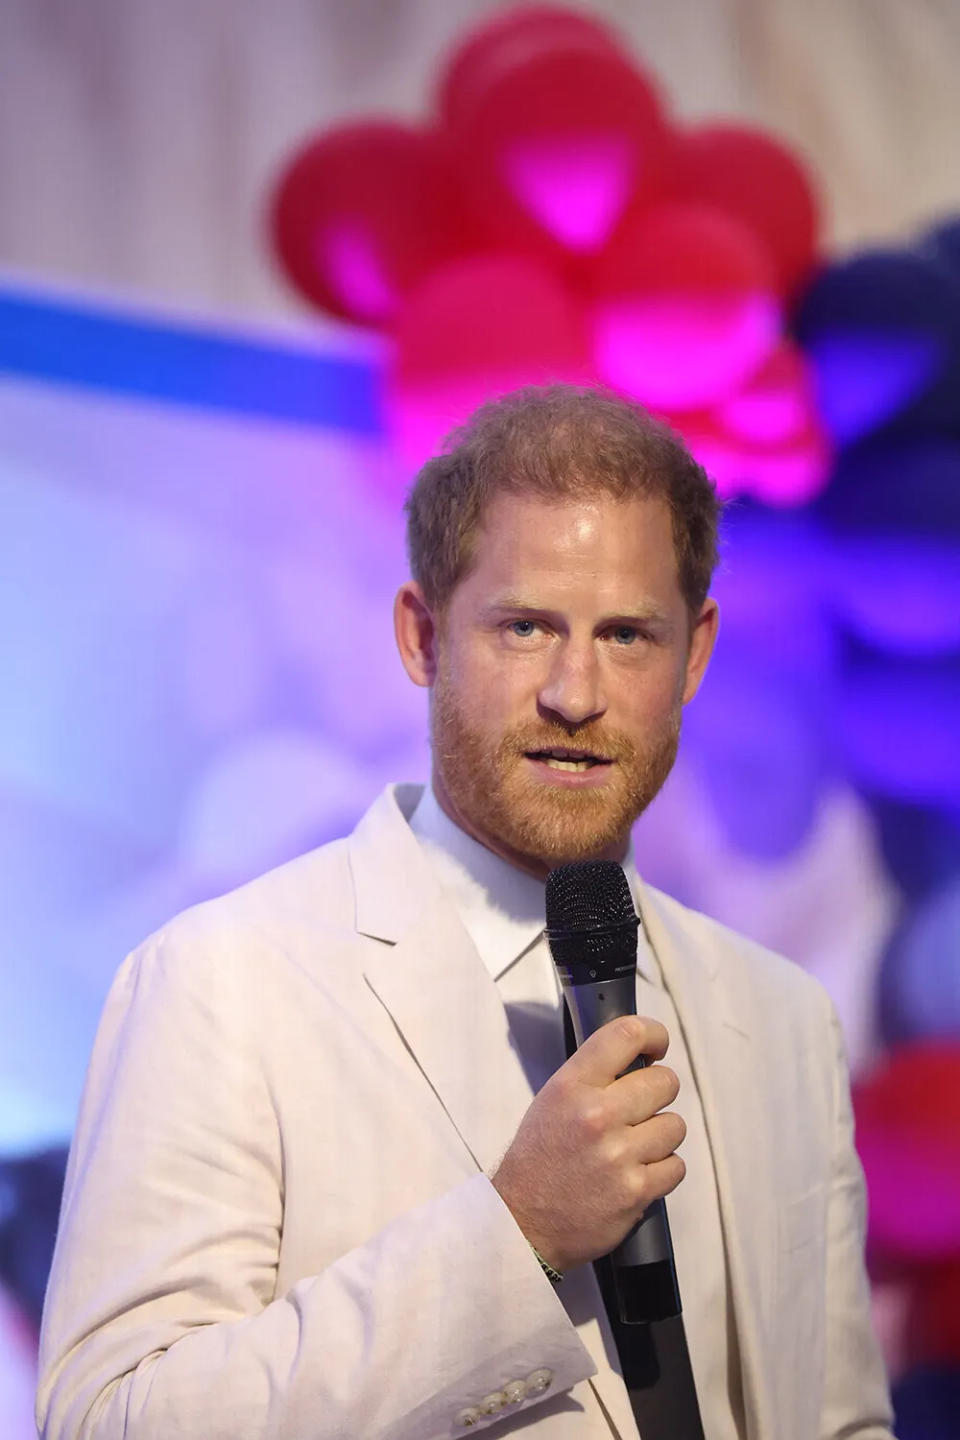 Prince Harry speaking to a mic wearing an off-white suit